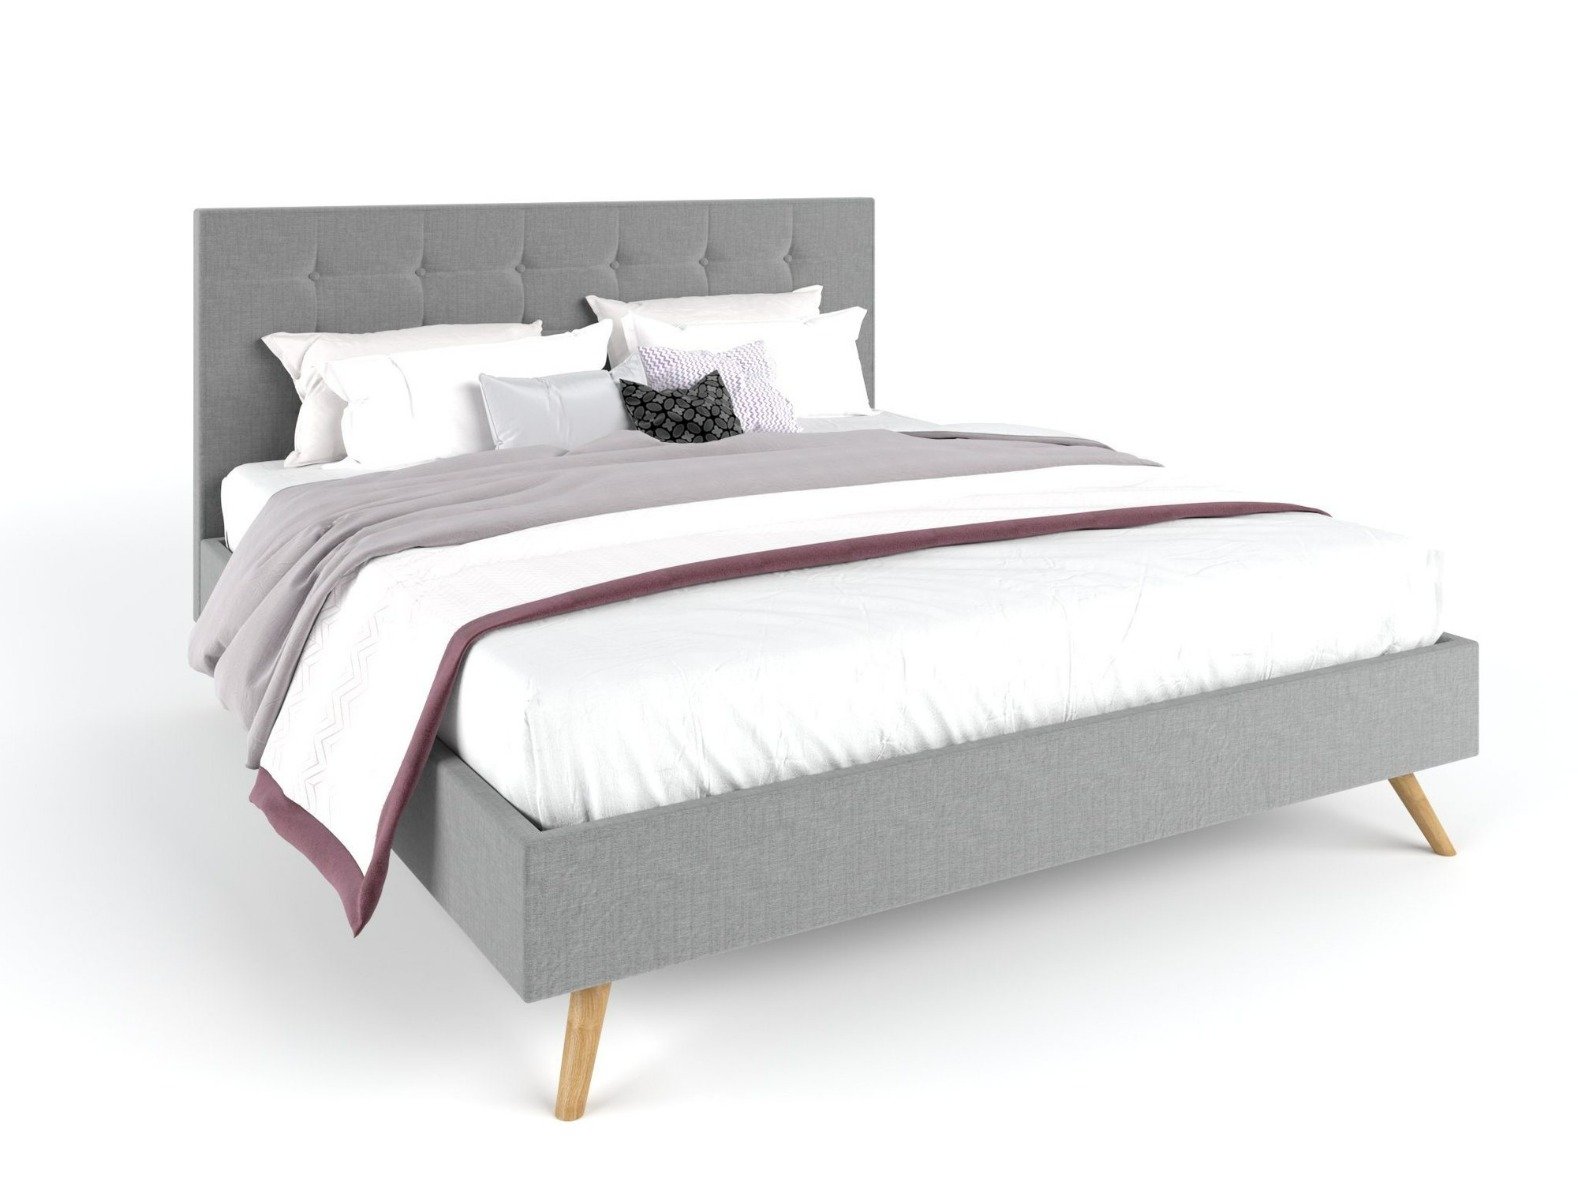 Bed Frame Fabric frame stone grey queen